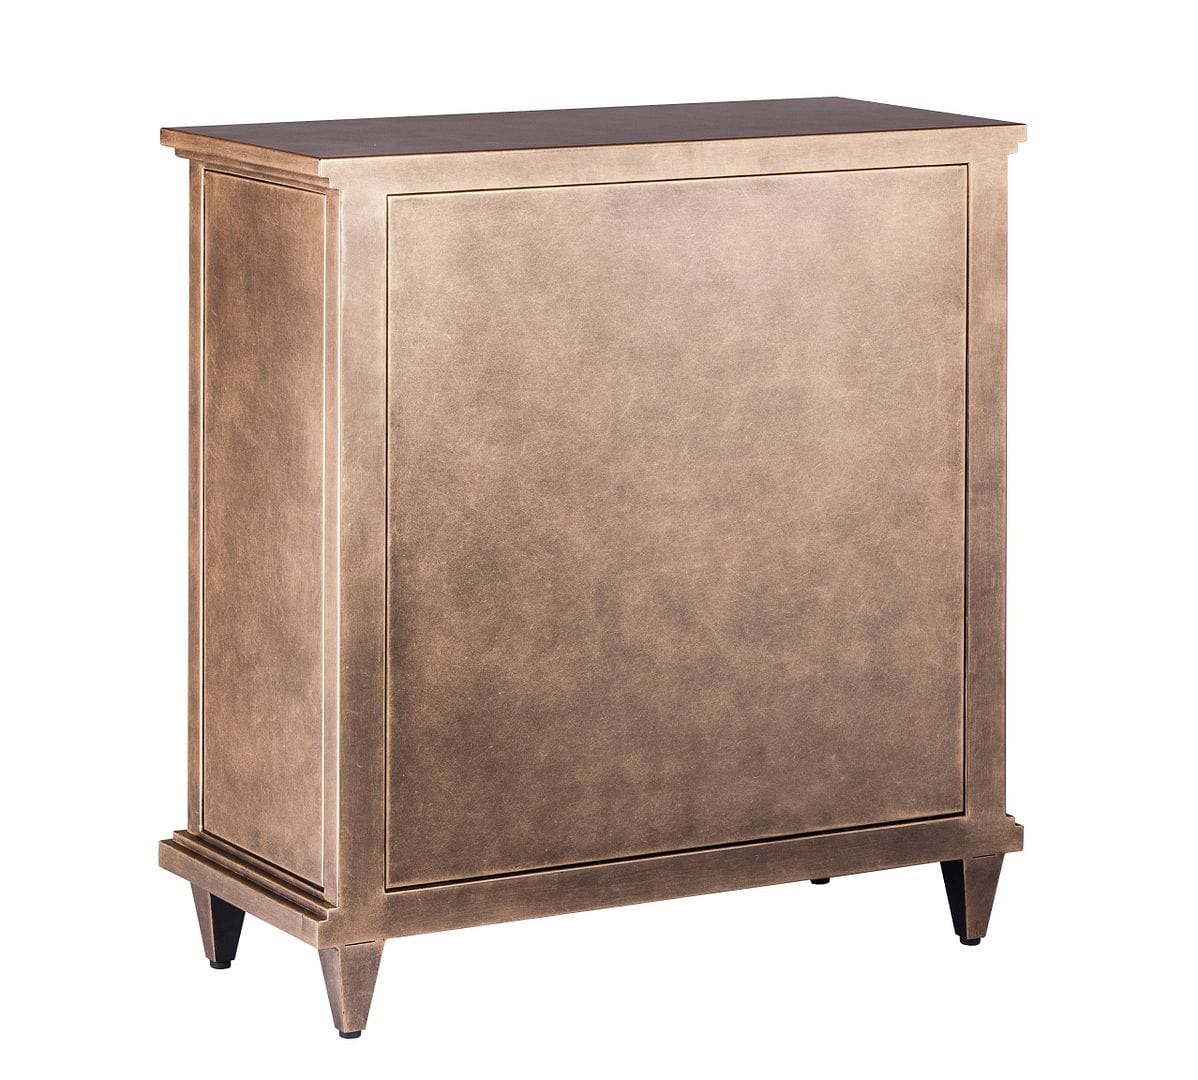 French Brass Sideboard Buffet Cabinet with Mirrored Glass Doors for Chic Storage